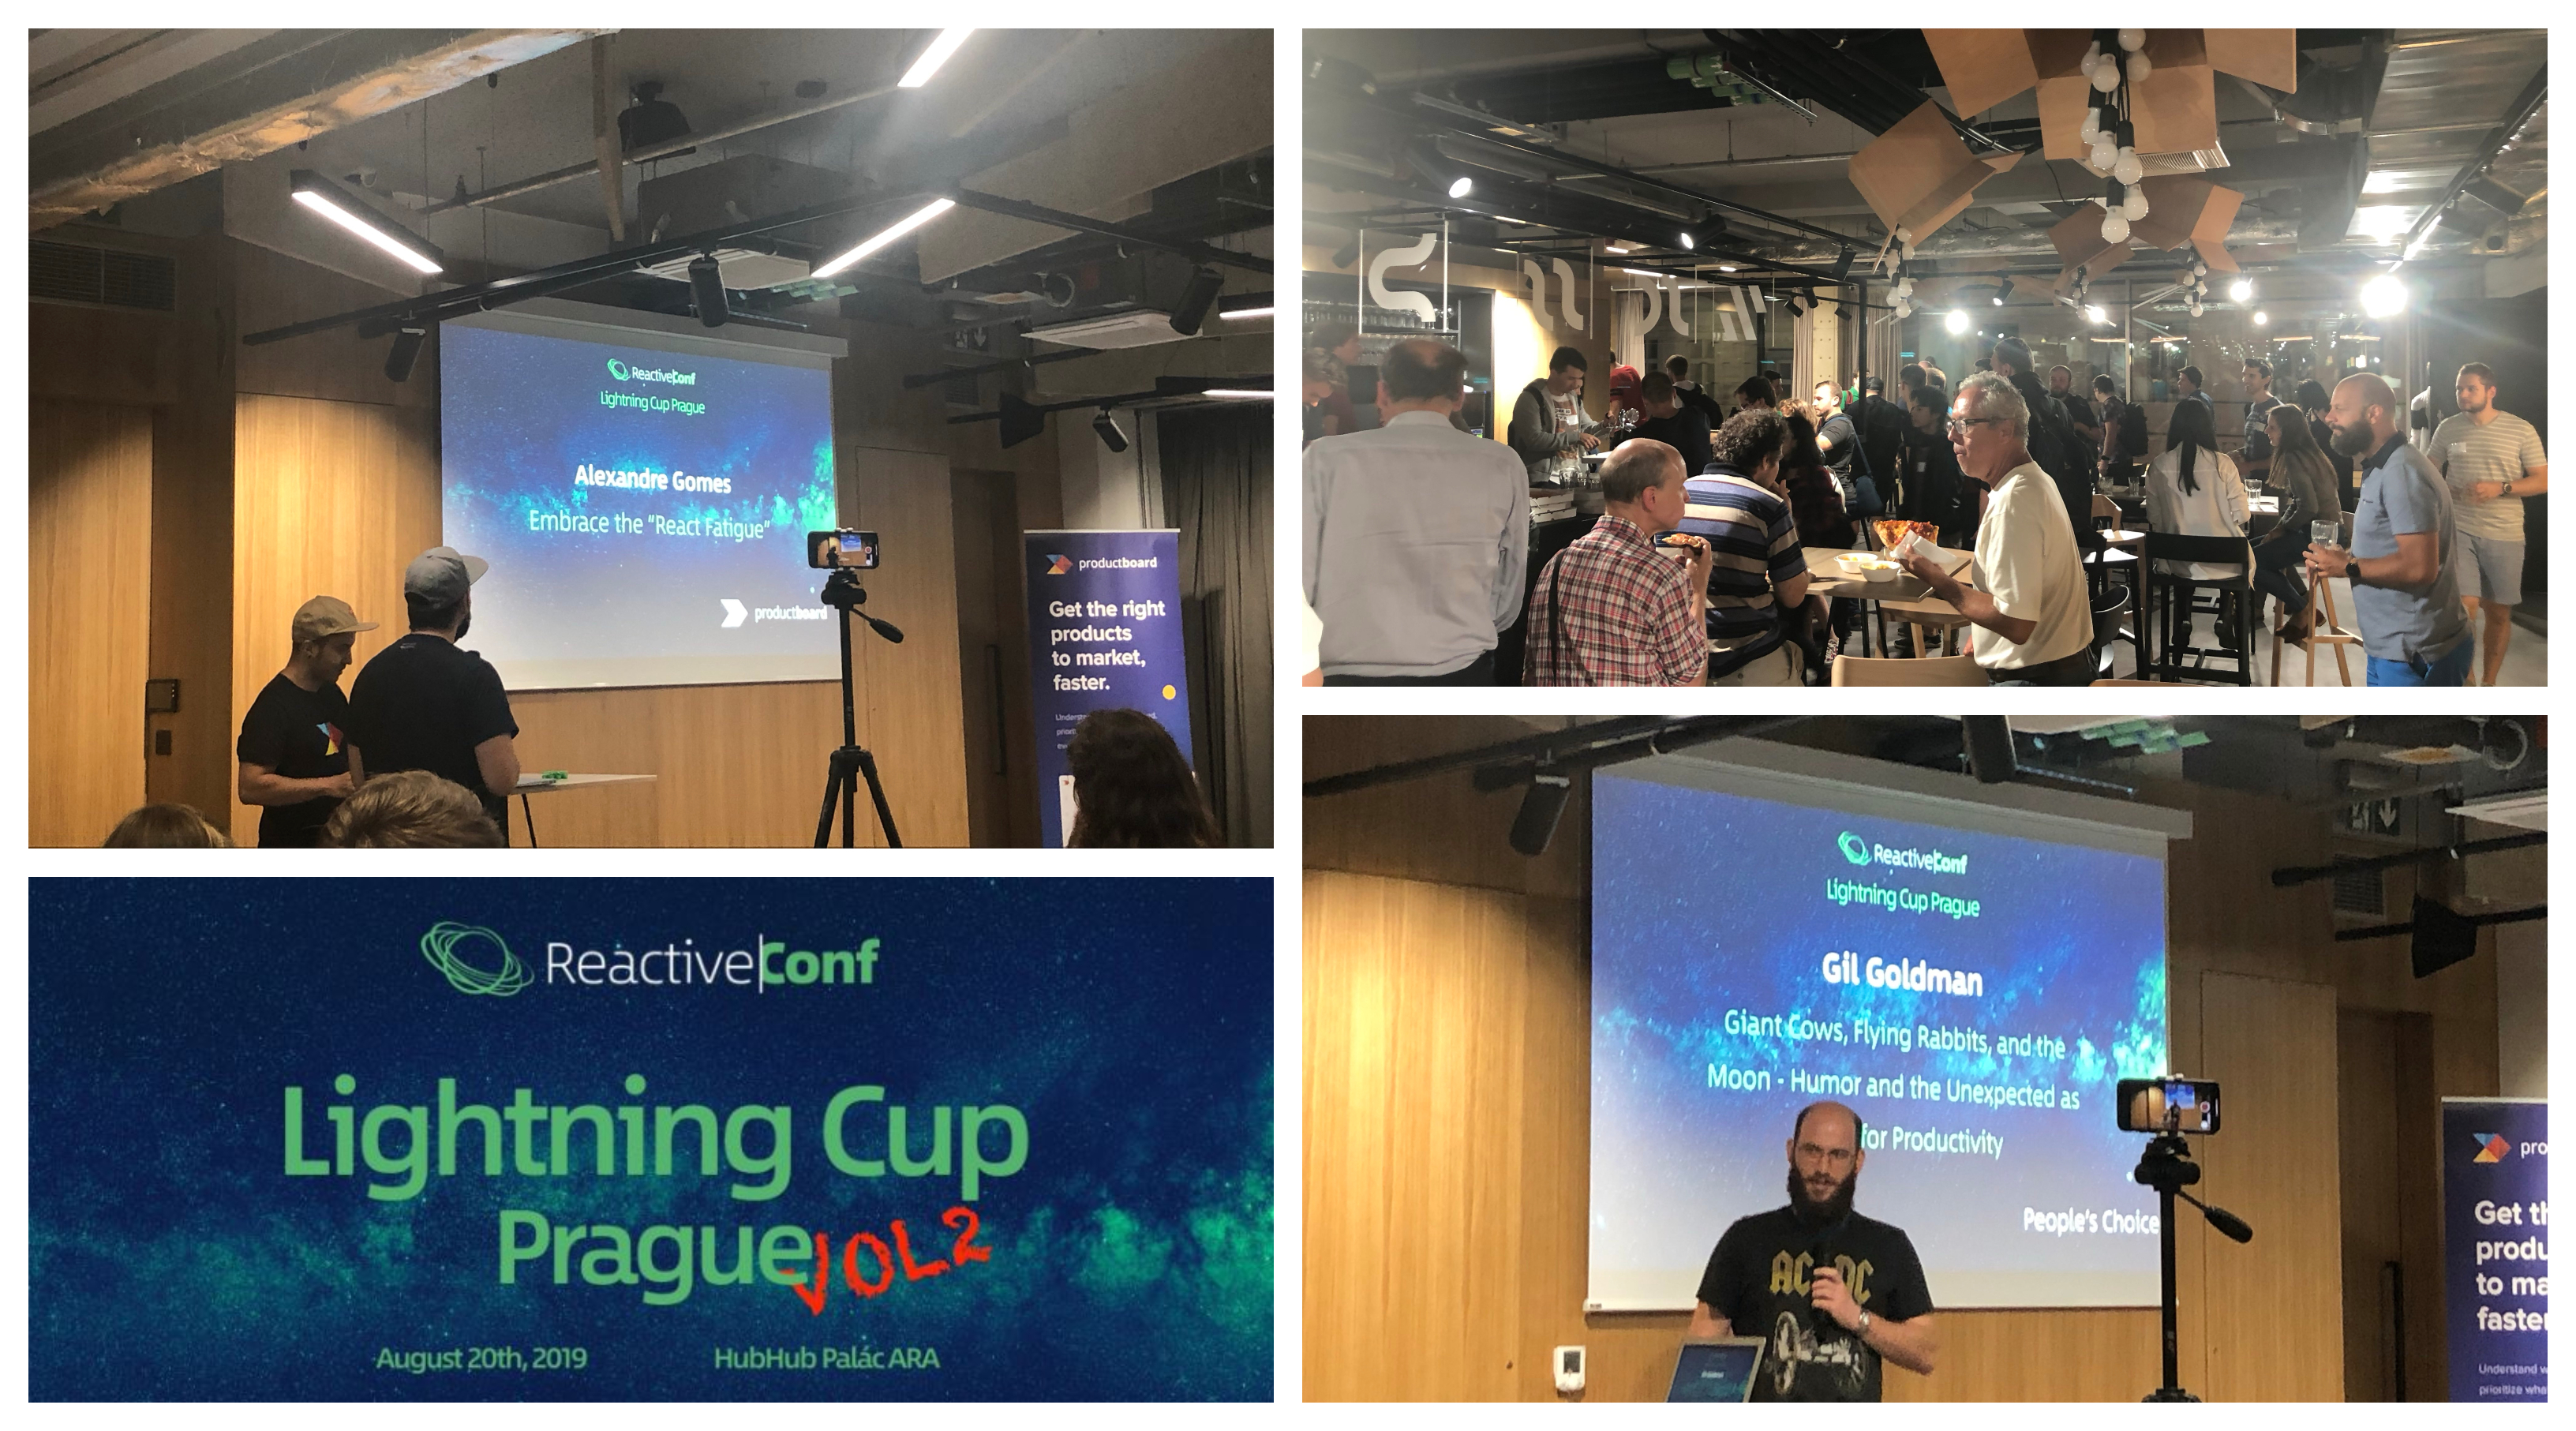 Lightning Cup Prague's speakers speaking publicly to developers